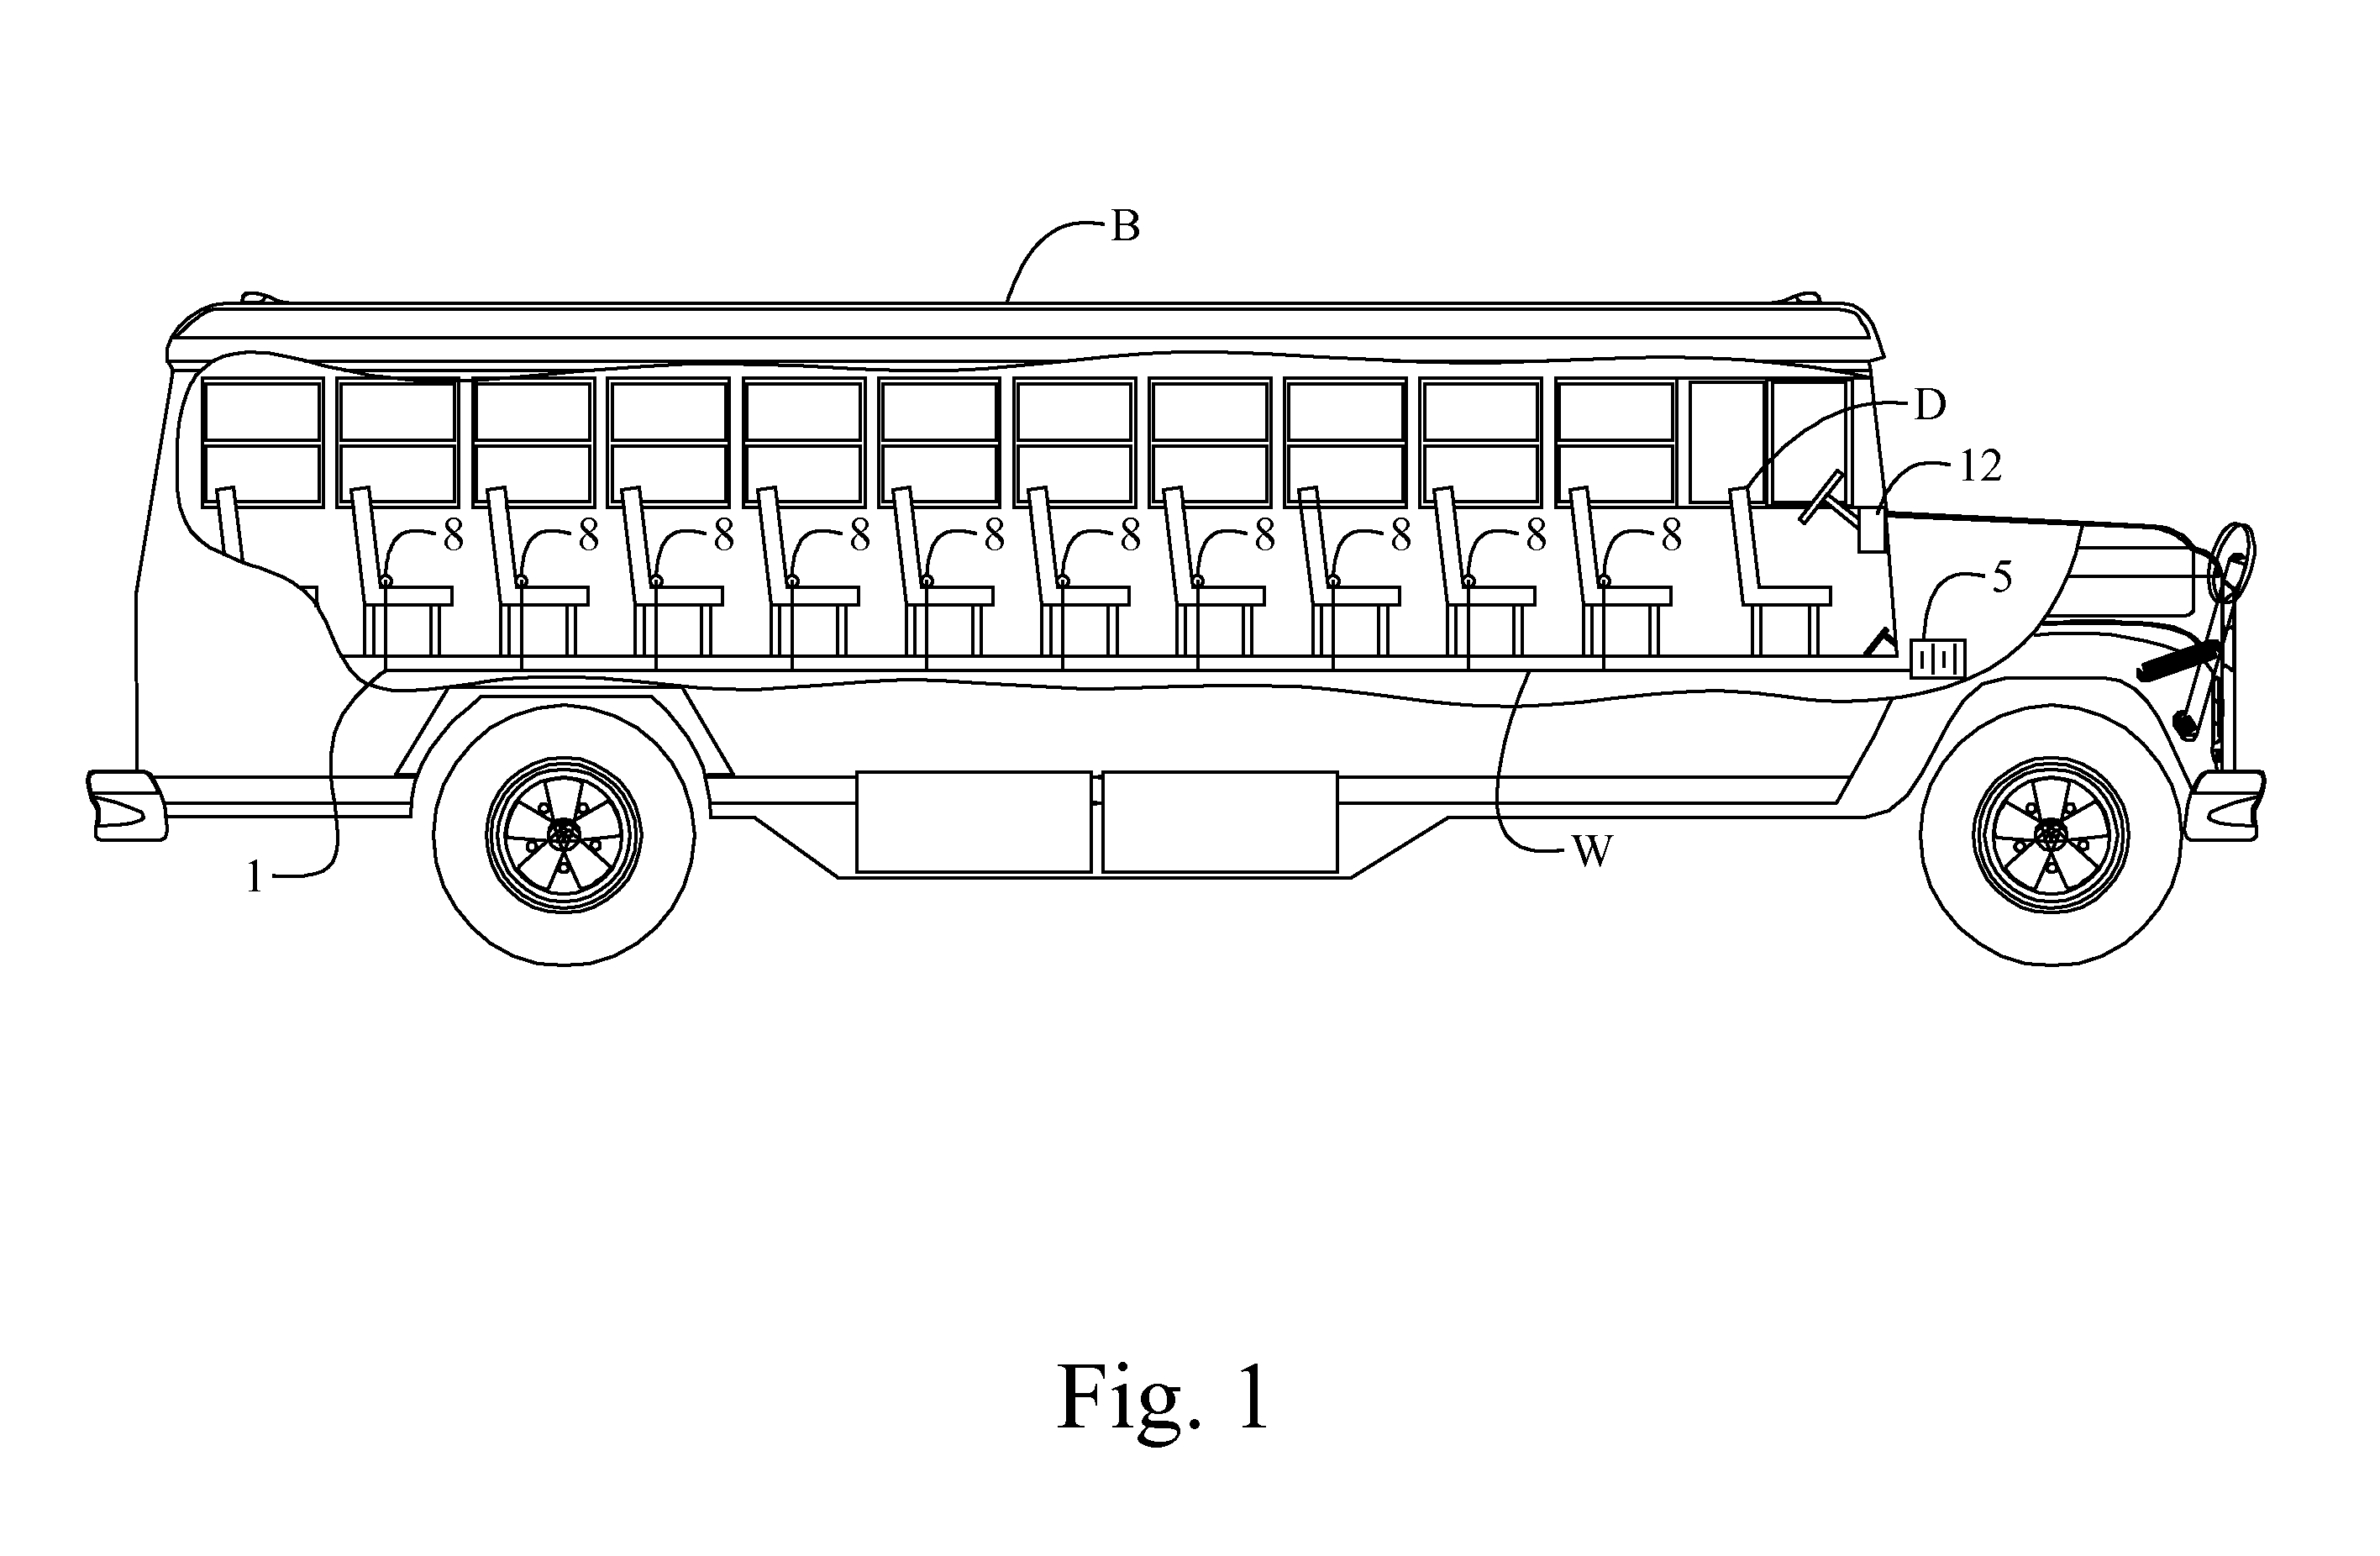 System for simultaneous release of safety belt latches